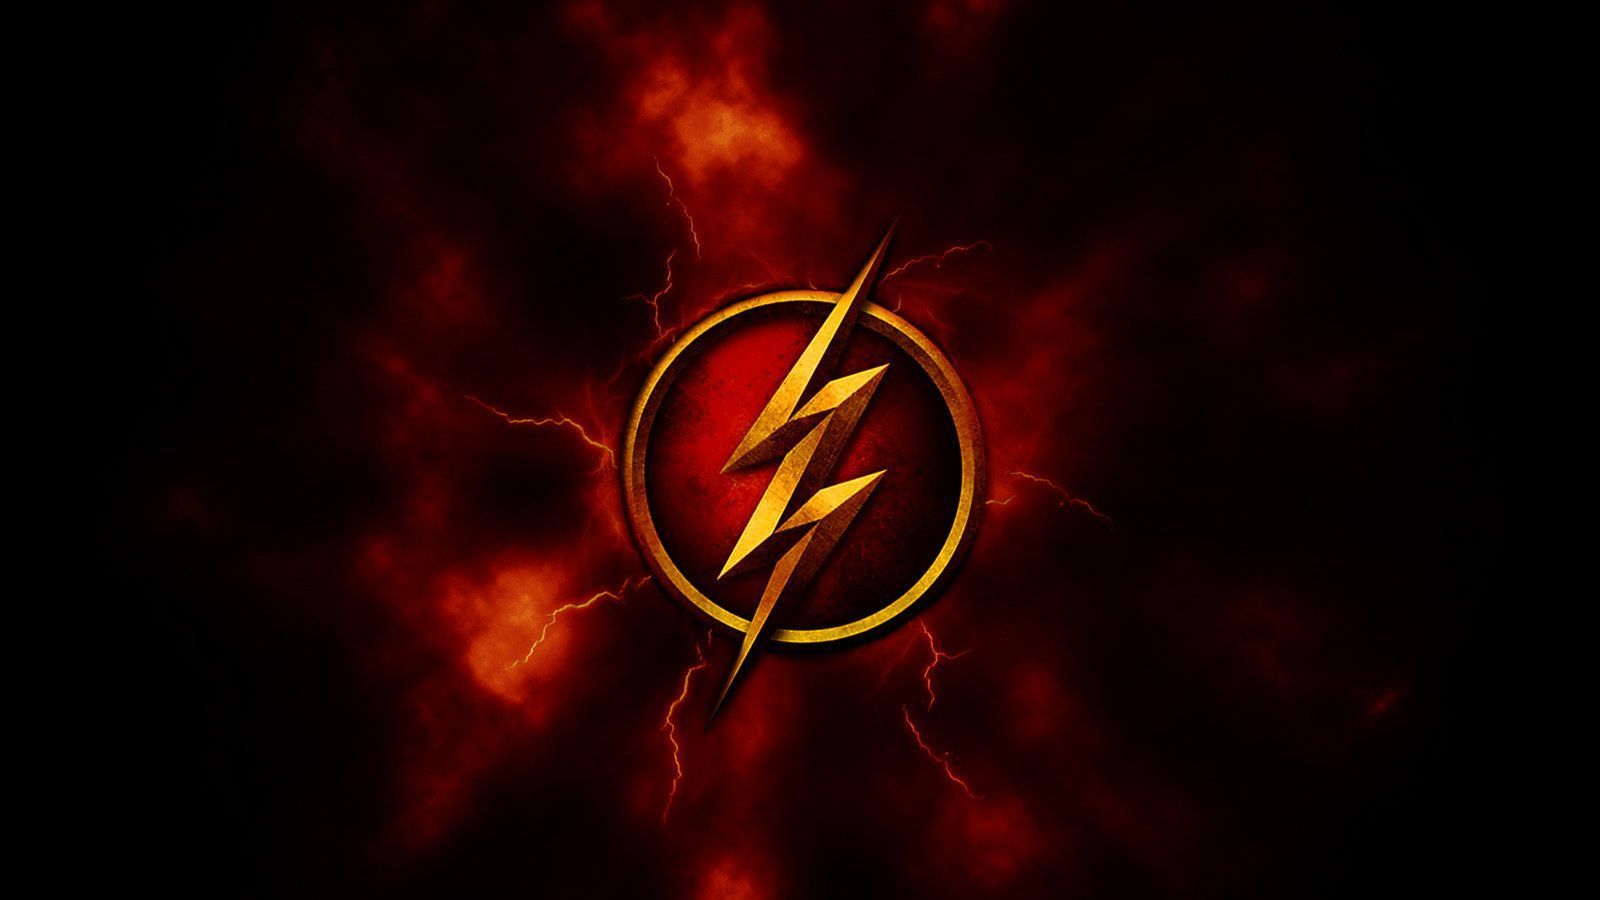 Cool Flash Wallpaper Free Cool Flash Background